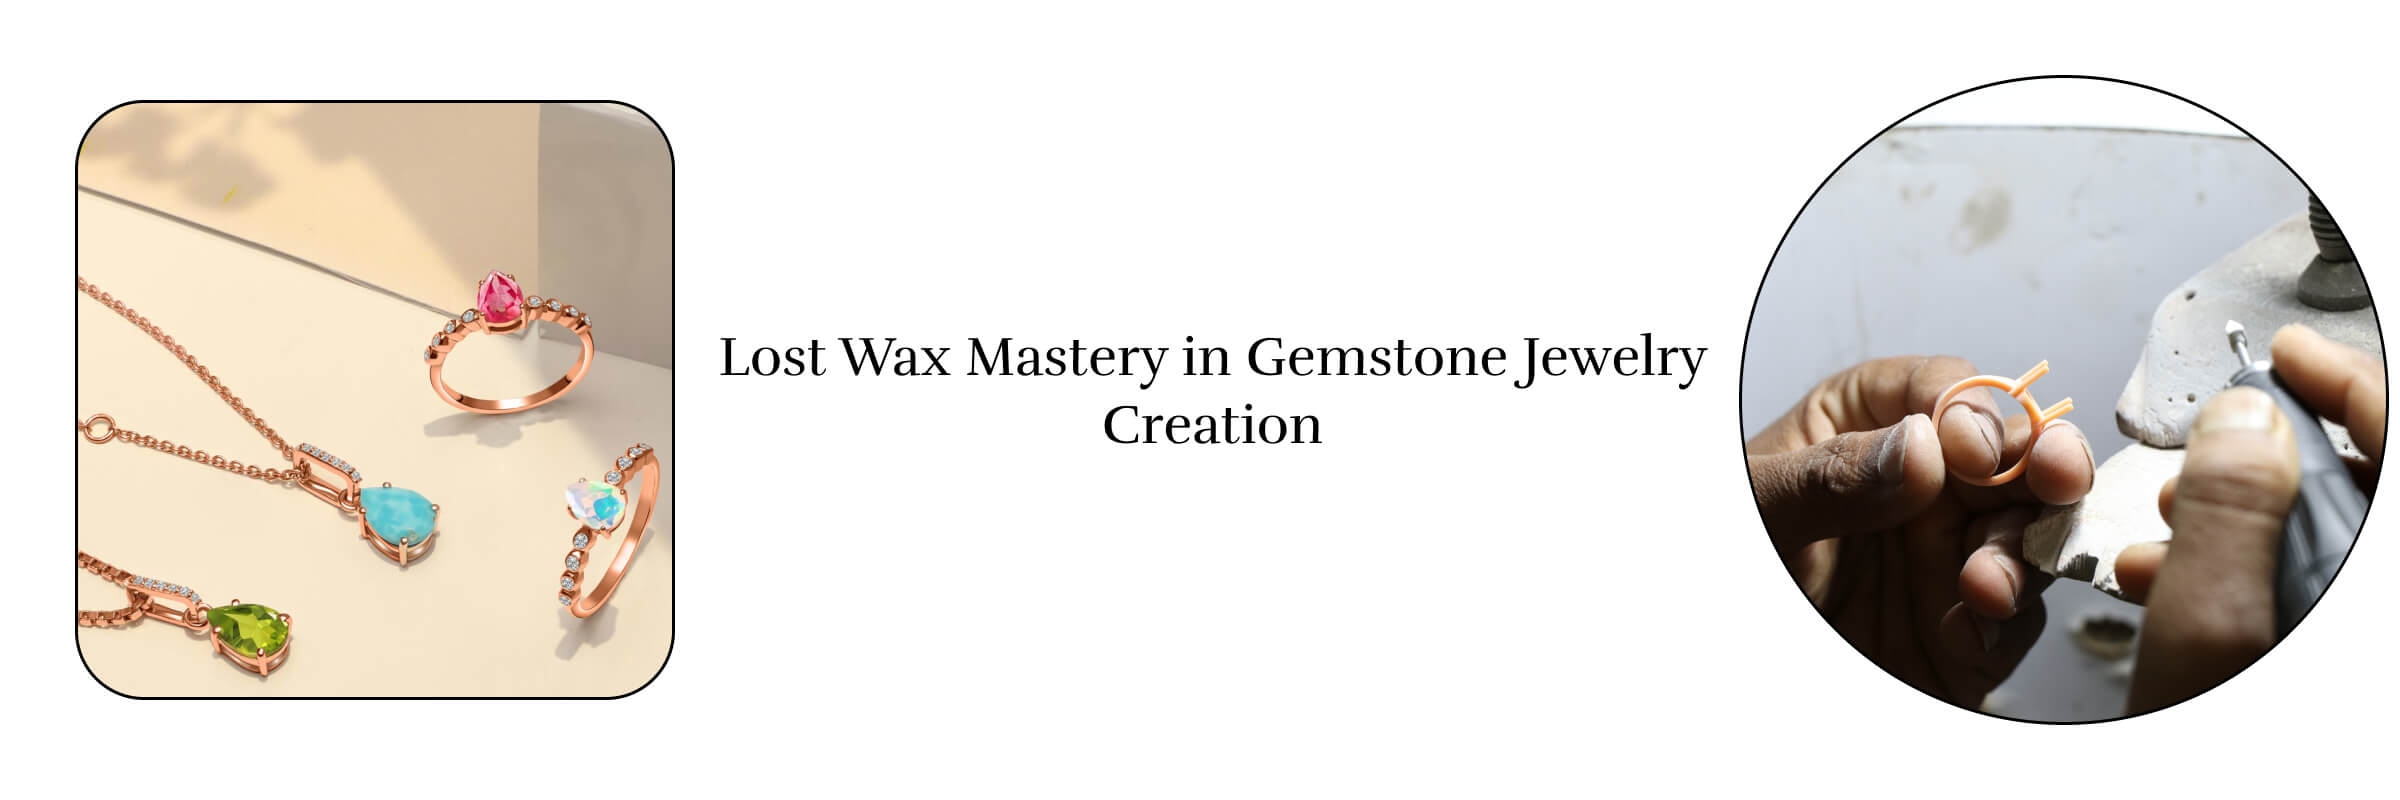 The Lost Wax Process An Integral Part of Wholesale Gemstone Jewelry Manufacturing